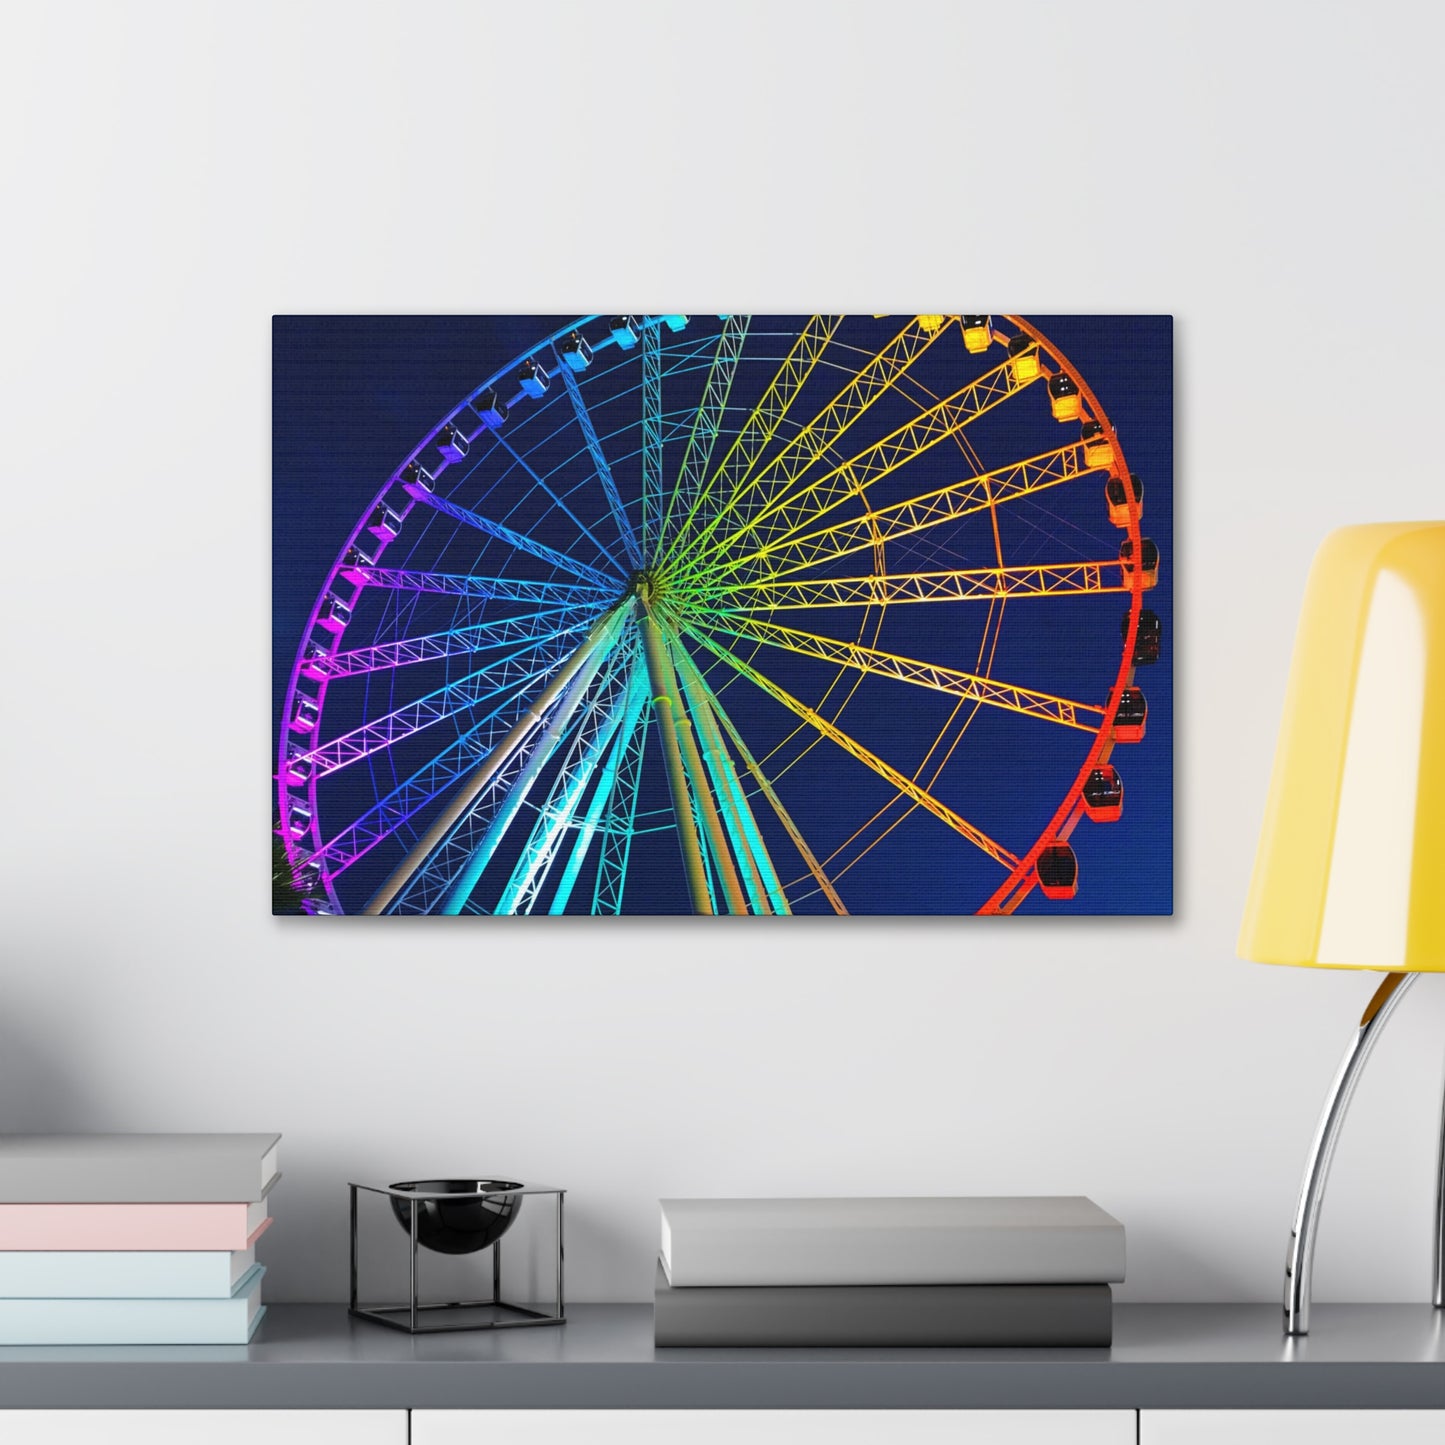 Rainbow Colored Ferris Wheel with Blue Sky at Night  - Canvas Print